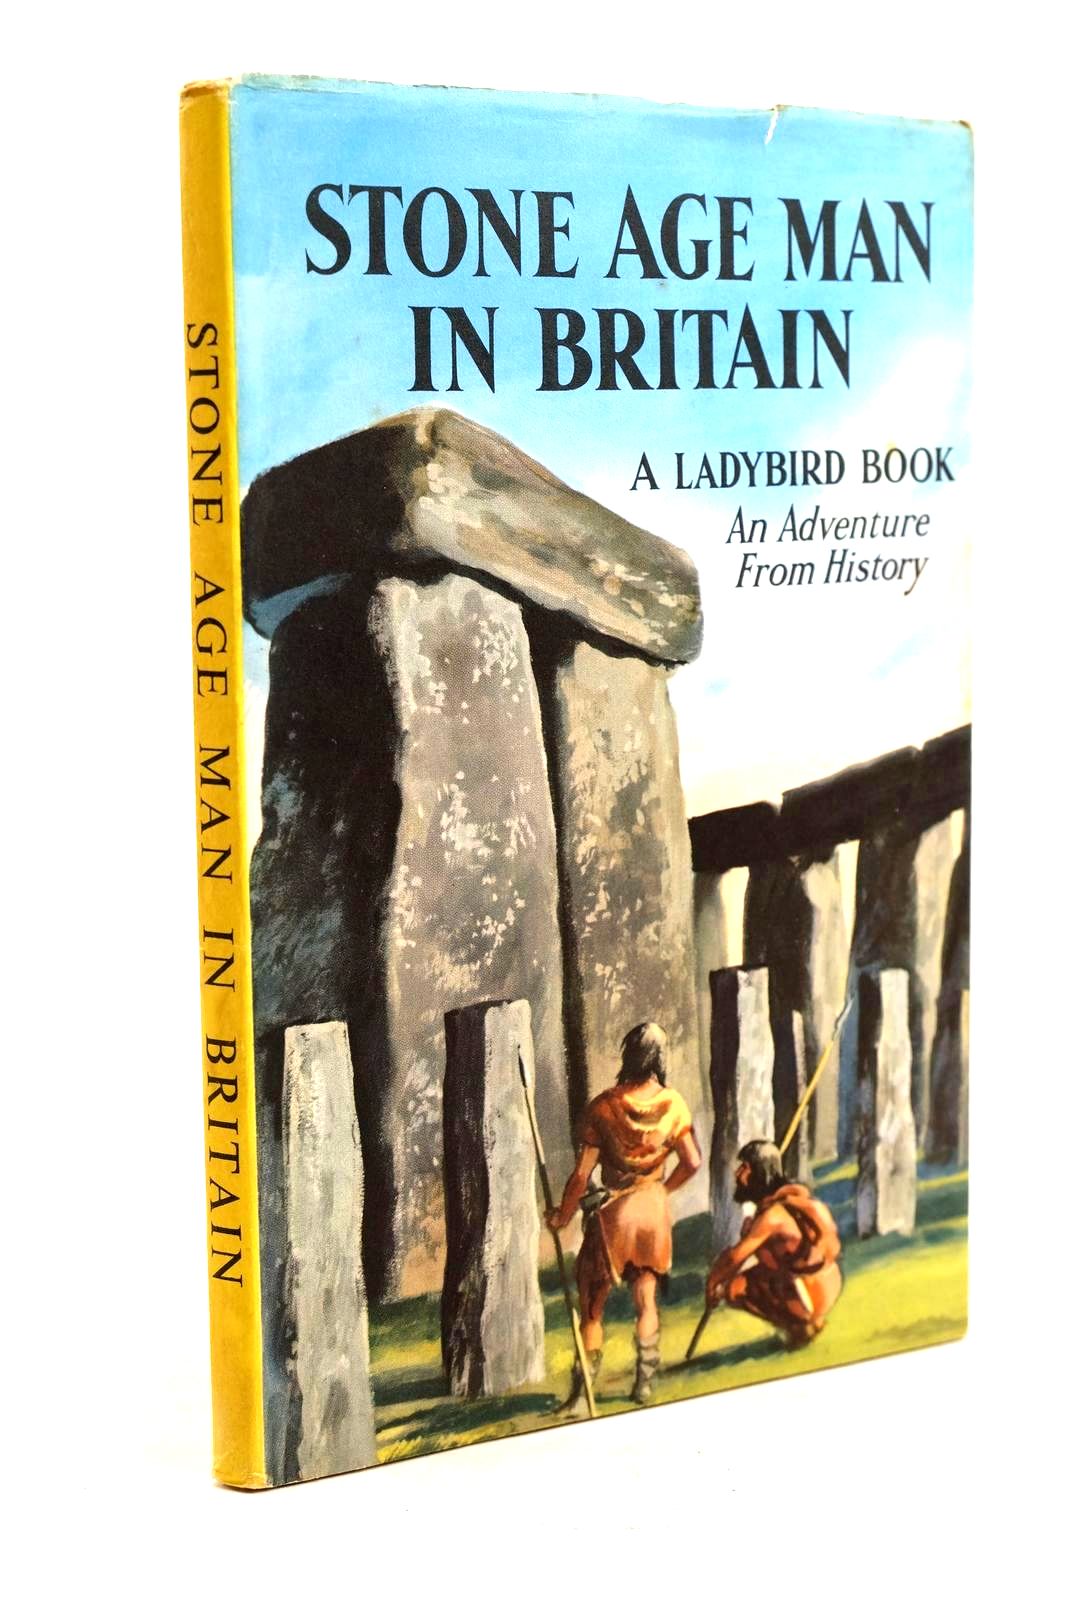 Photo of STONE AGE MAN IN BRITAIN written by Peach, L. Du Garde illustrated by Kenney, John published by Wills & Hepworth Ltd. (STOCK CODE: 1320630)  for sale by Stella & Rose's Books